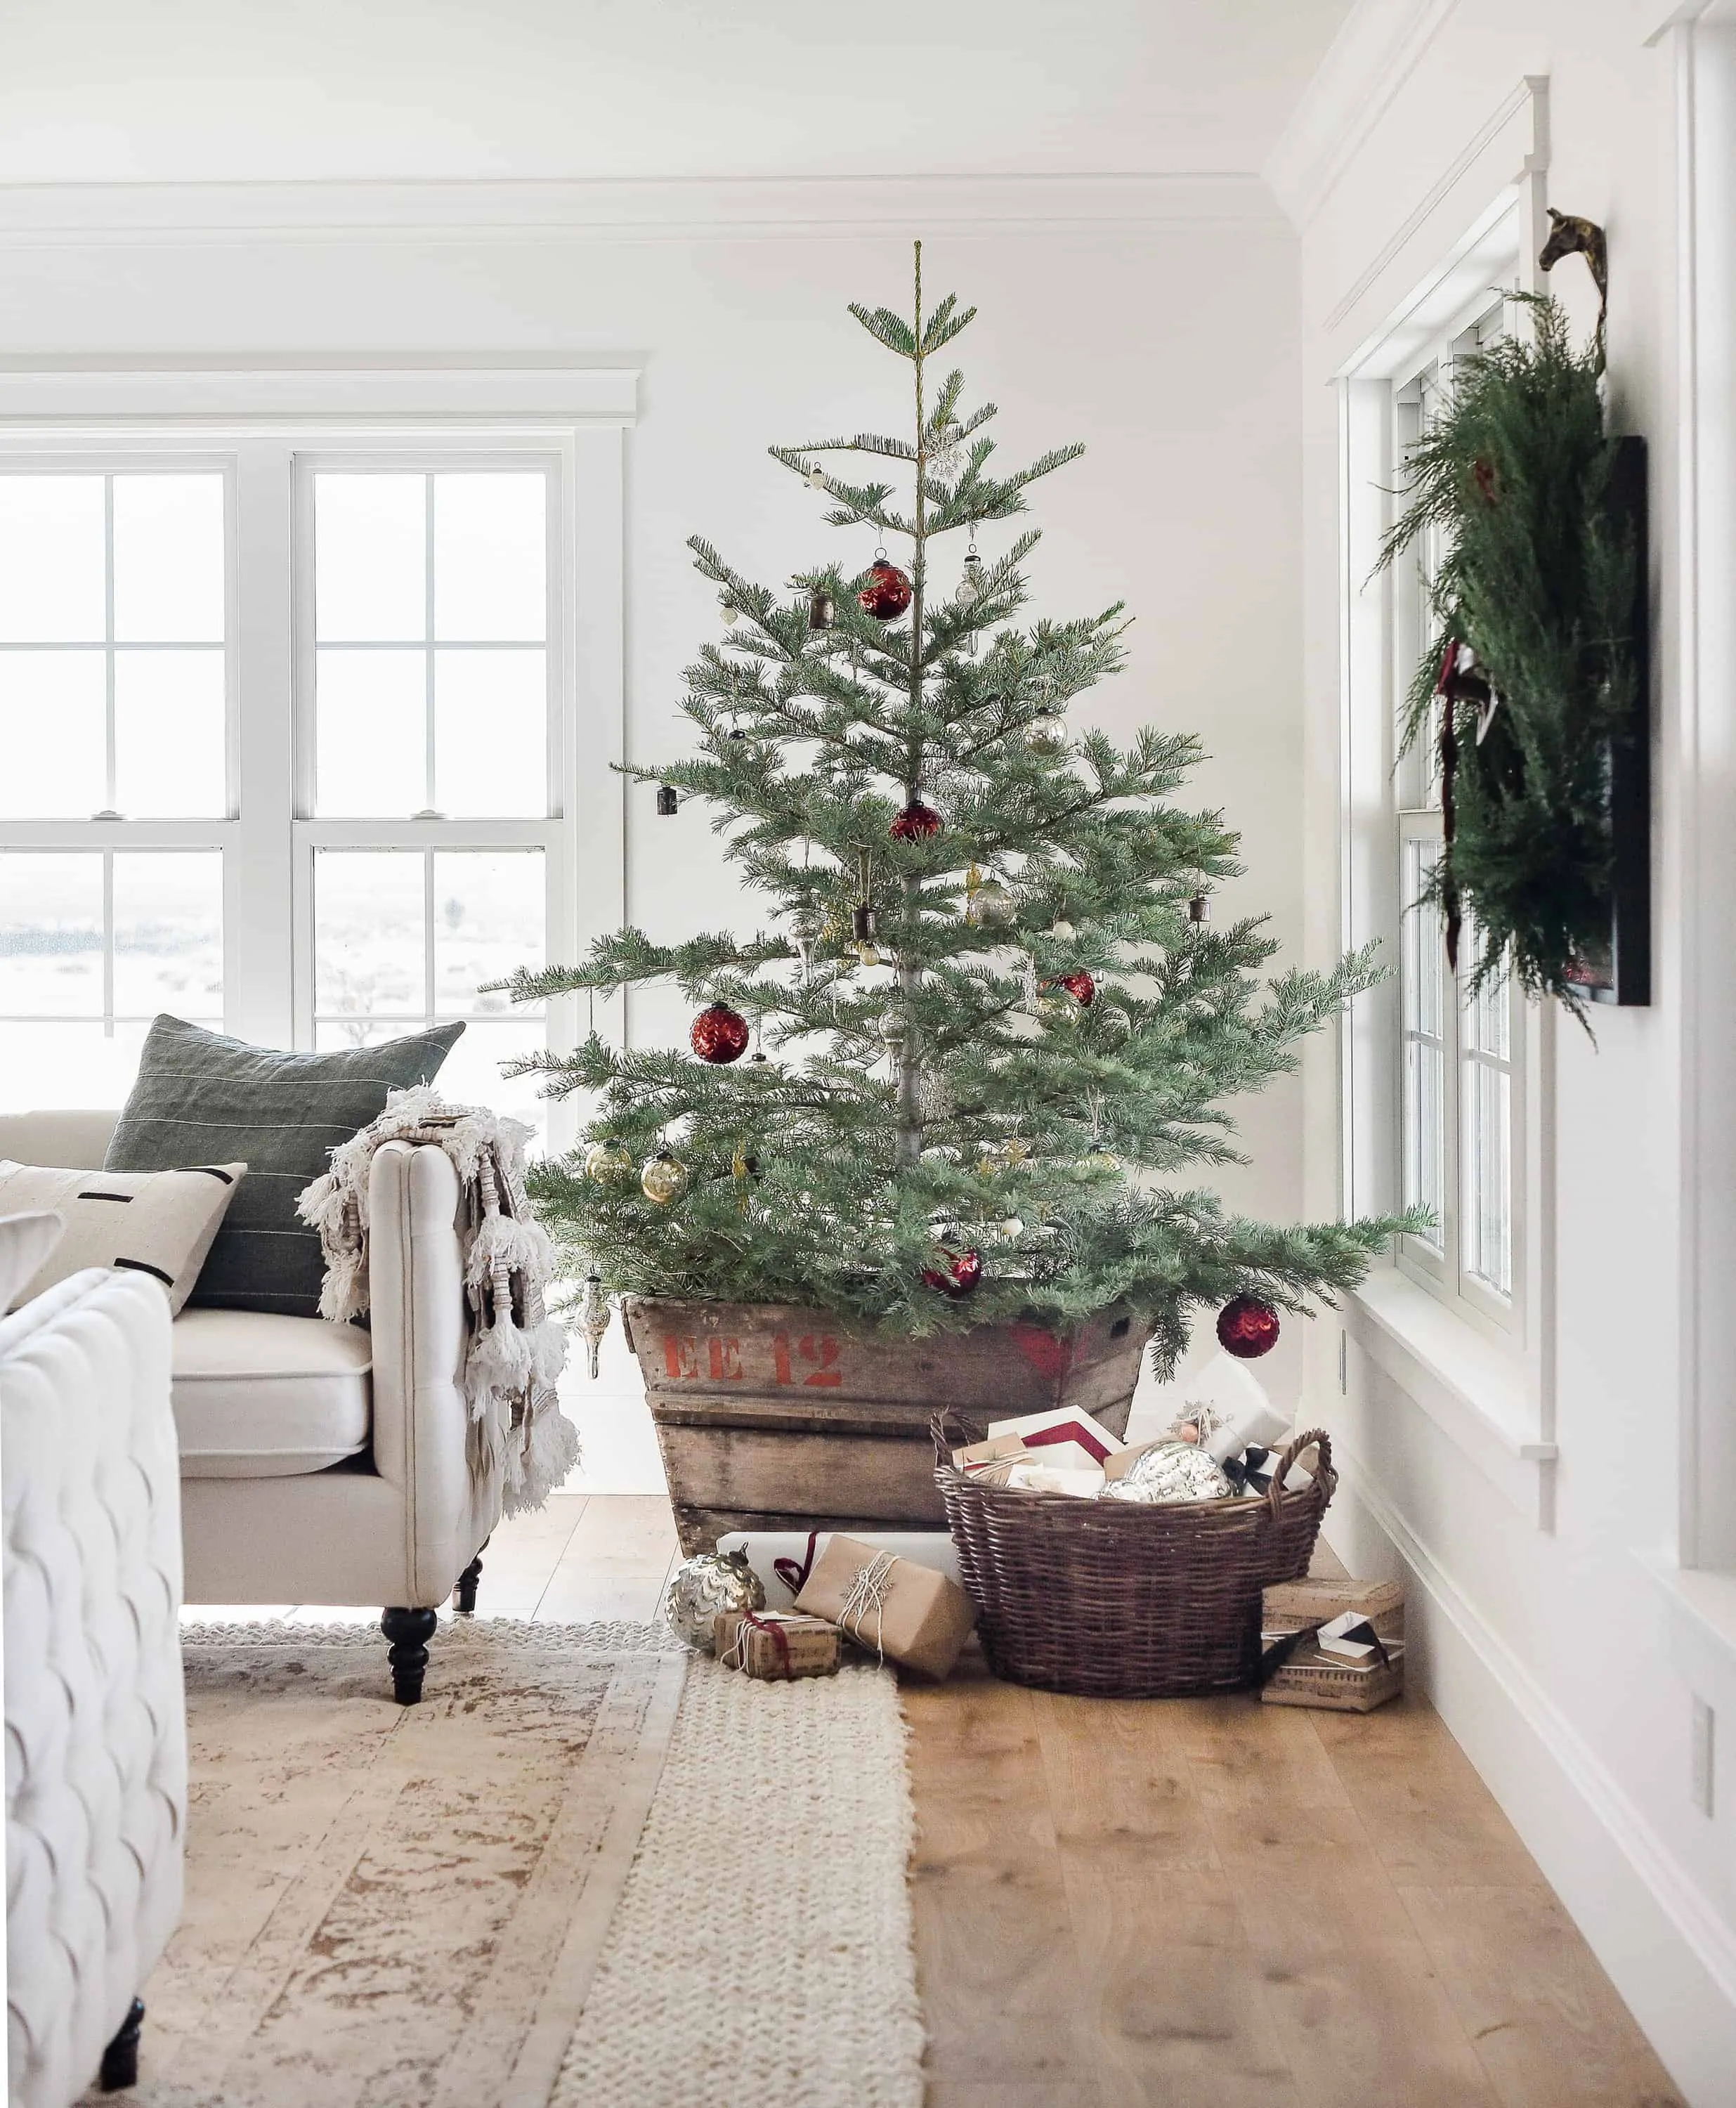 If you’re wondering where to find real Christmas trees near you, or how to pick the best real Christmas tree, you’re in luck! Today we’re sharing everything you need to know about real Christmas trees: from how much they cost to how to care for them!